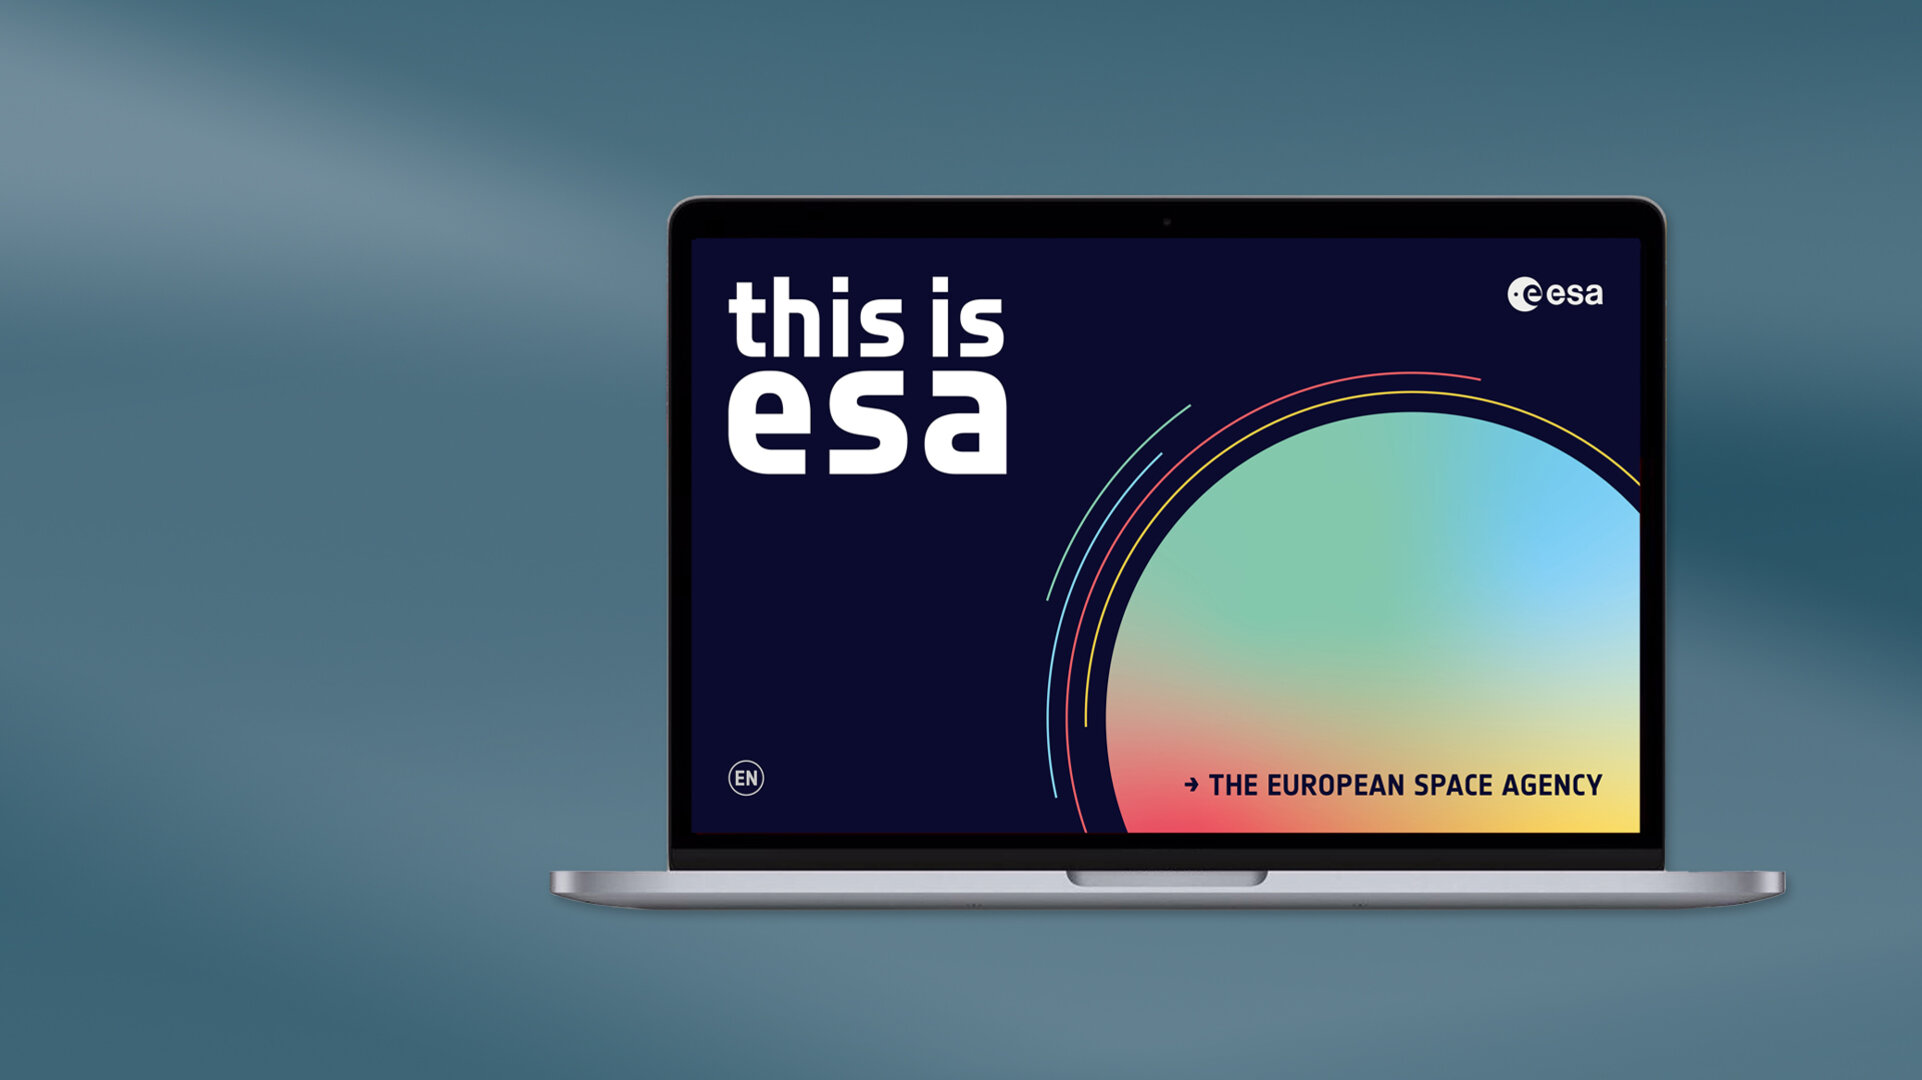 This is ESA